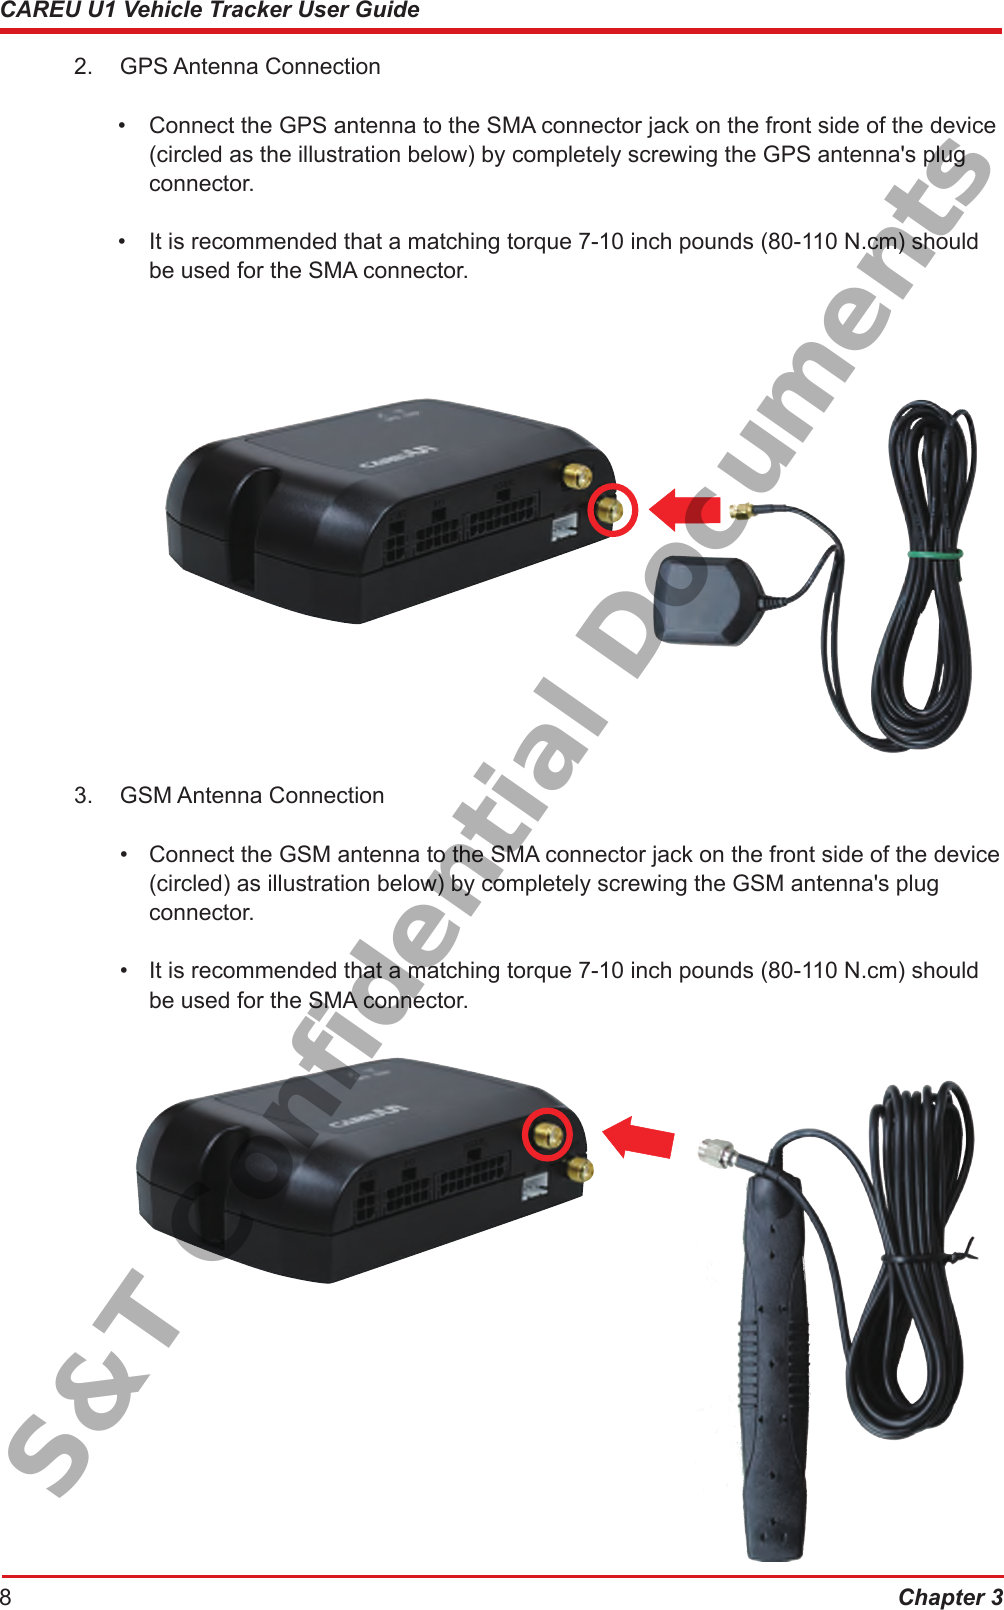 Chapter 38CAREU U1 Vehicle Tracker User Guide2.  GPS Antenna Connection     •  Connect the GPS antenna to the SMA connector jack on the front side of the device      (circled as the illustration below) by completely screwing the GPS antenna&apos;s plug       connector.•  It is recommended that a matching torque 7-10 inch pounds (80-110 N.cm) should      be used for the SMA connector.3.  GSM Antenna Connection•  Connect the GSM antenna to the SMA connector jack on the front side of the device       (circled) as illustration below) by completely screwing the GSM antenna&apos;s plug         connector.•  It is recommended that a matching torque 7-10 inch pounds (80-110 N.cm) should       be used for the SMA connector.S&amp;T Confidential Documents